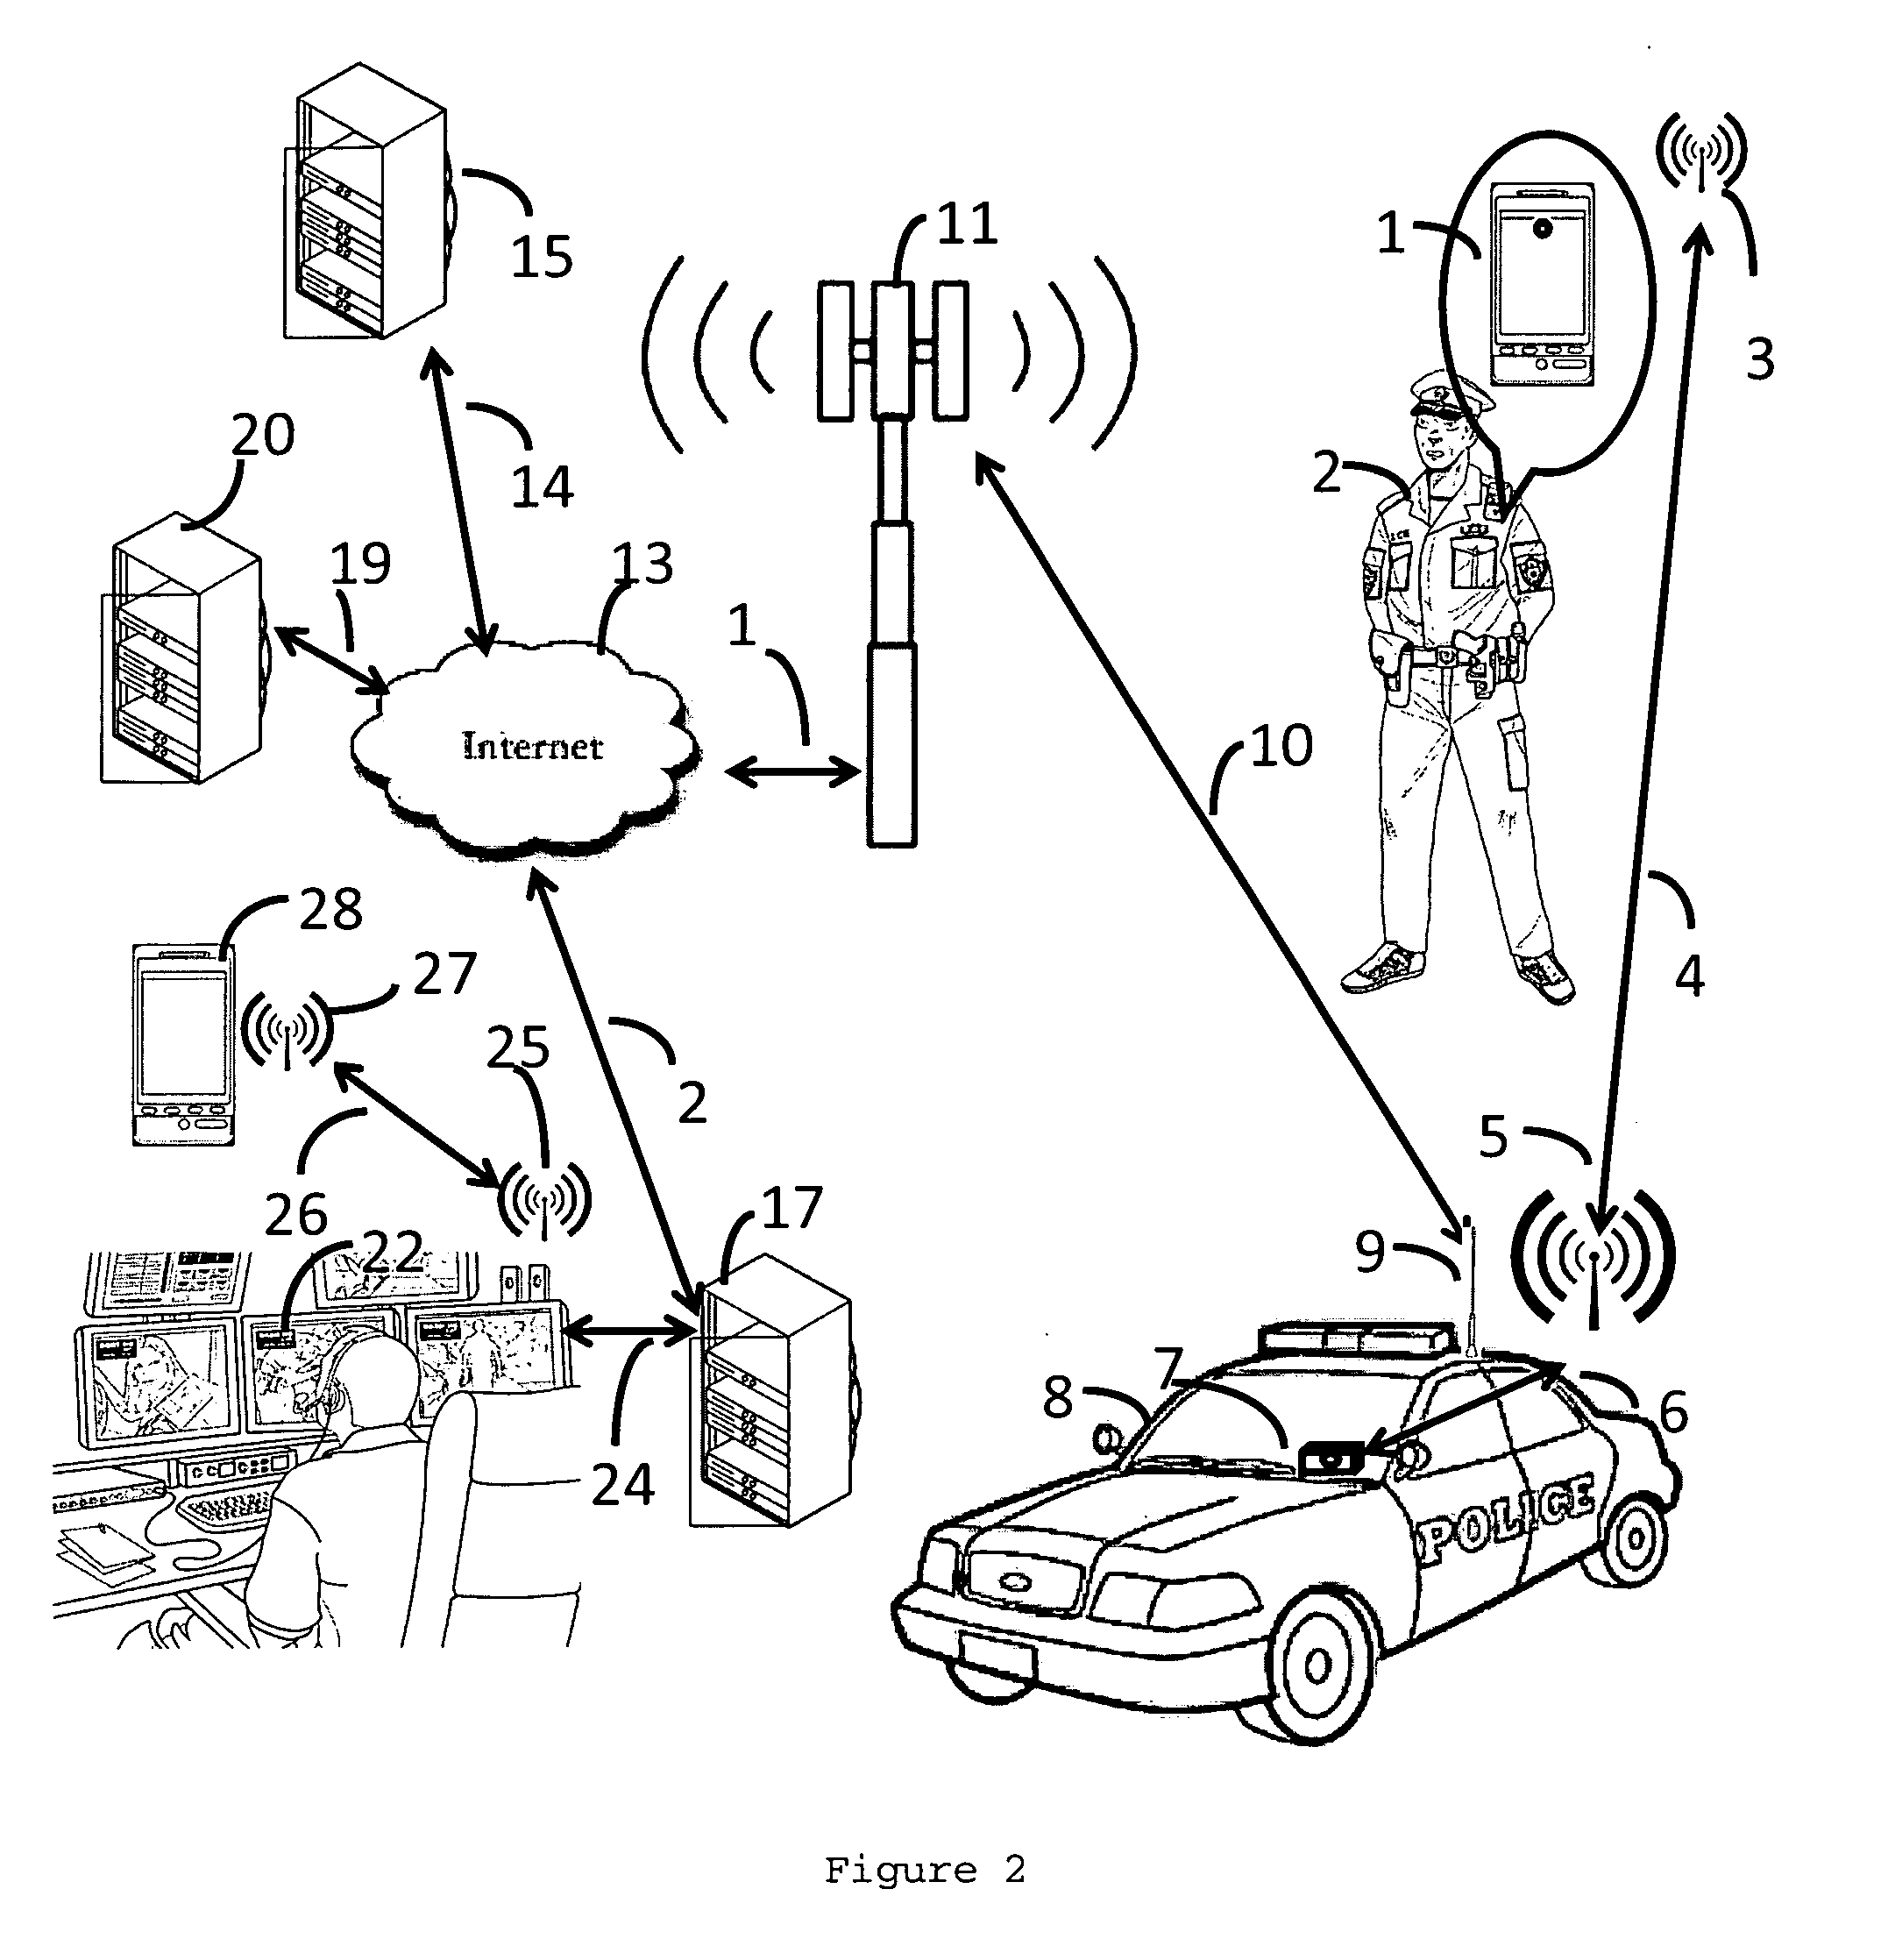 Law enforcement real time digital information chain of custody assurance system and method